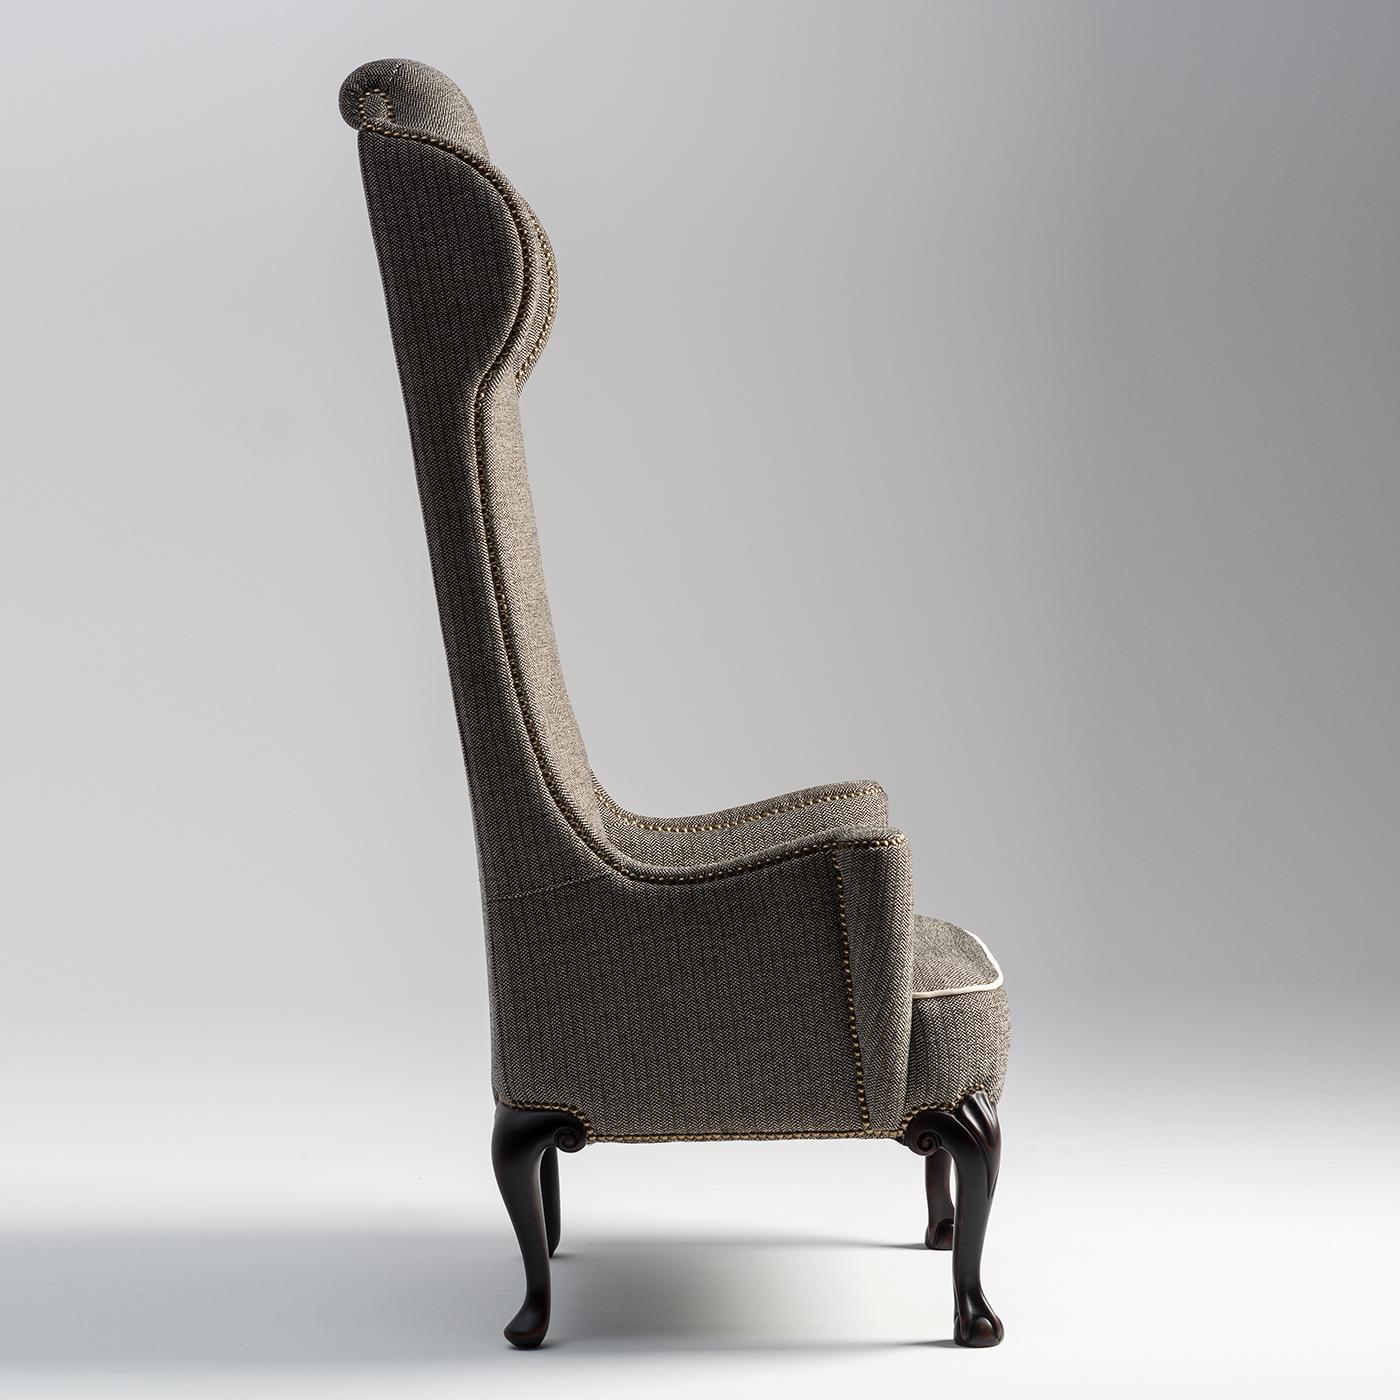 An armchair out of the ordinary with a buttoned back. Exaggerated ears create an enveloping effect. The front legs are finely carved with a soft pattern and with a ball and claw design. Cabriolet hind legs. The fixed seat has a grosgrain border.